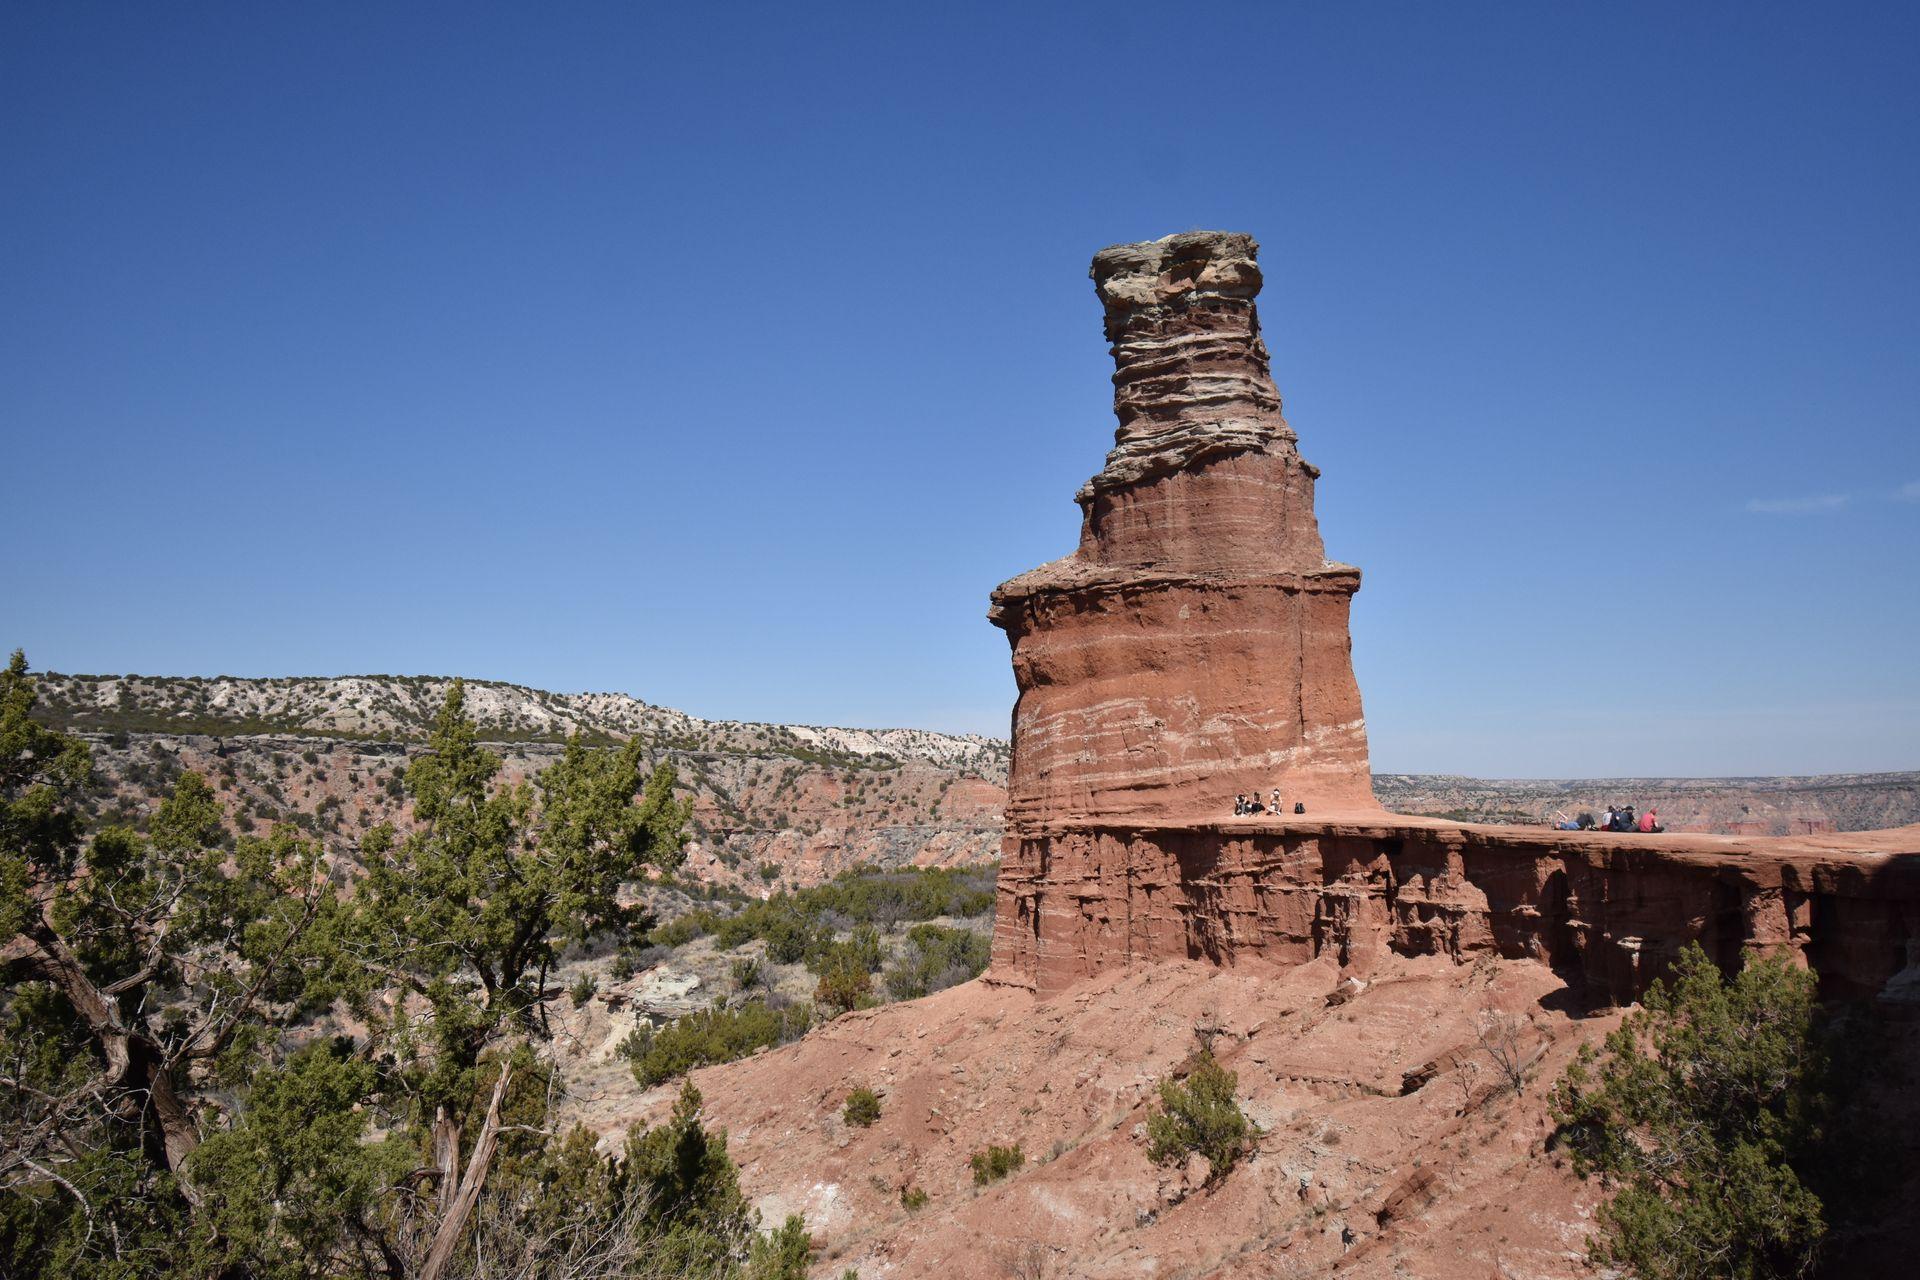 A large orange rock formation that resembles a lighthouse. There are some below it and a view of the canyon in the background.